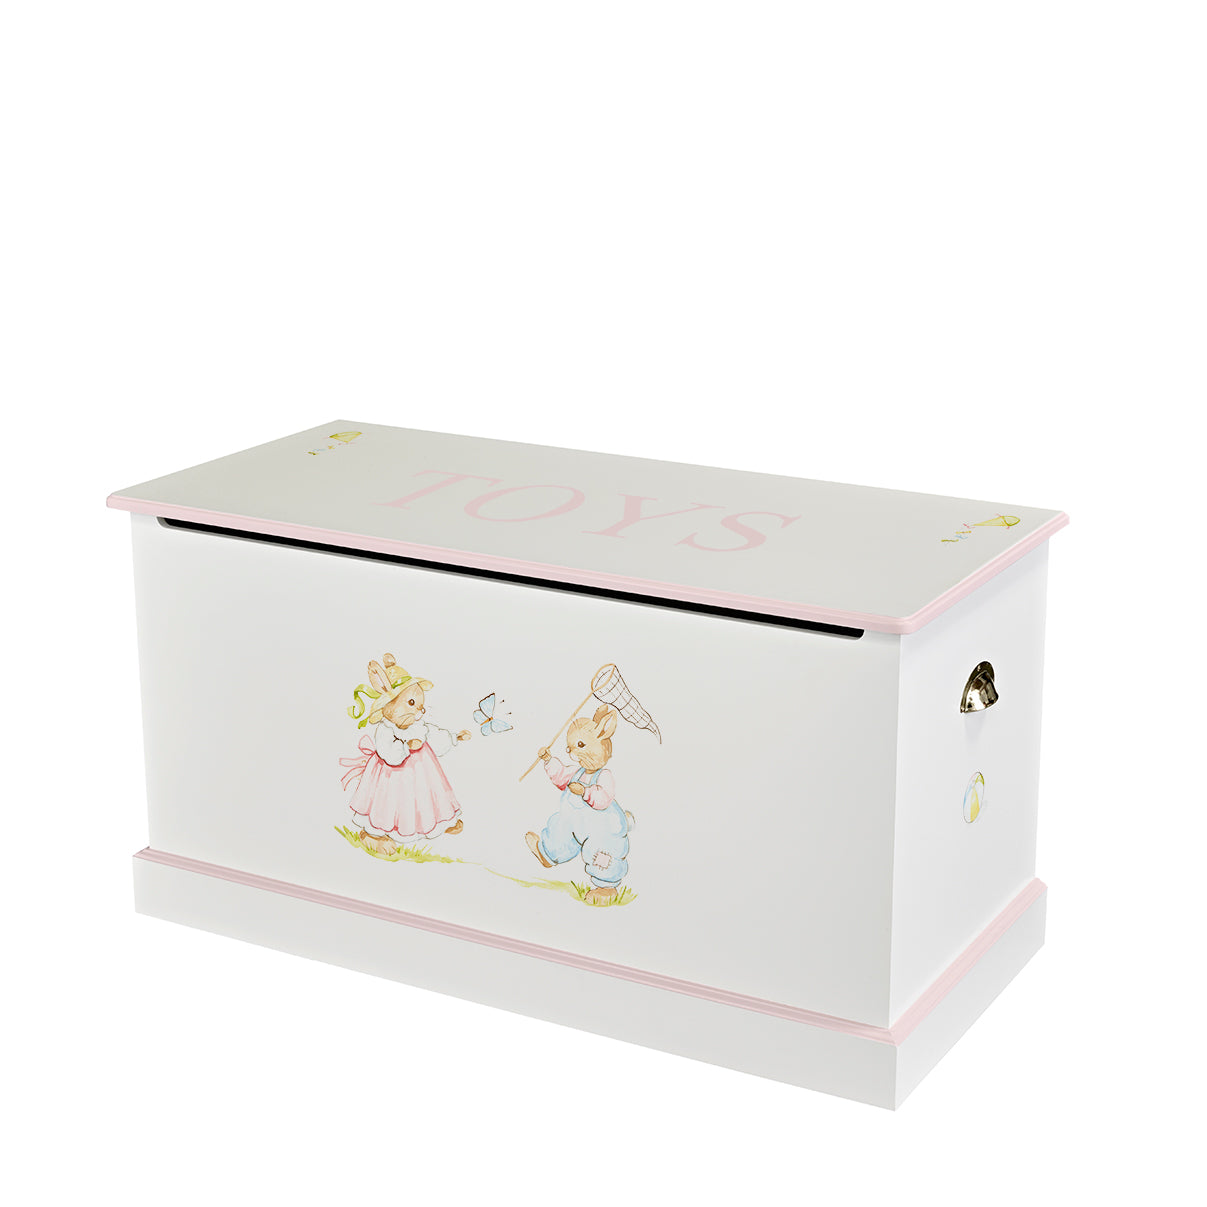 Large Dragons Toy Box - Barbara's Bunnies with Dragons Pink Trim